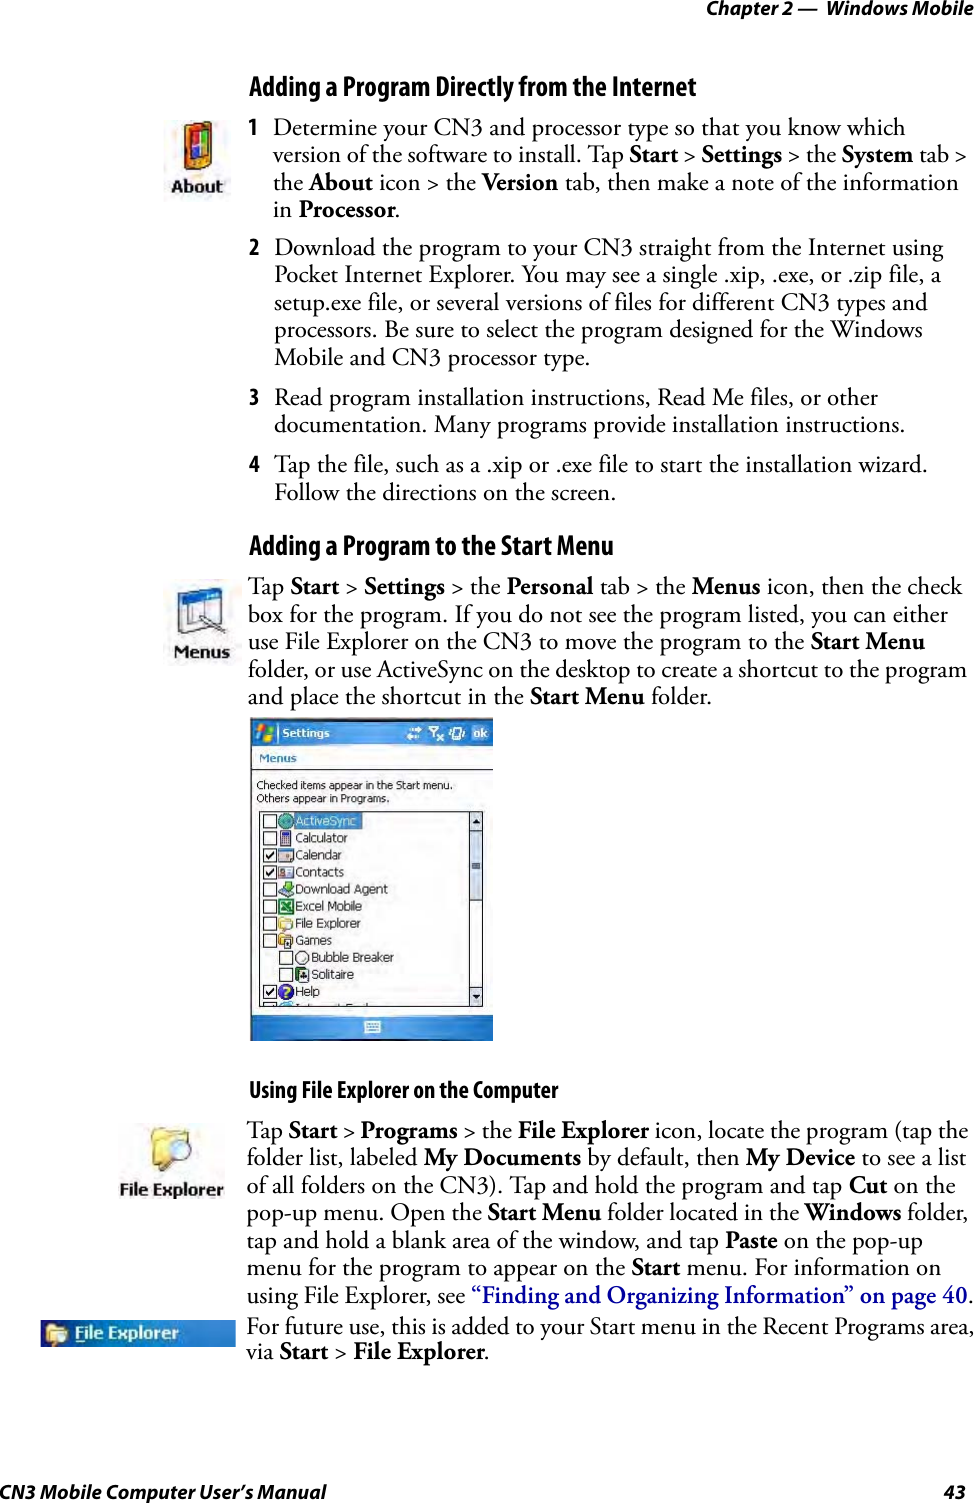 Chapter 2 —  Windows MobileCN3 Mobile Computer User’s Manual 43Adding a Program Directly from the Internet2Download the program to your CN3 straight from the Internet using Pocket Internet Explorer. You may see a single .xip, .exe, or .zip file, a setup.exe file, or several versions of files for different CN3 types and processors. Be sure to select the program designed for the Windows Mobile and CN3 processor type.3Read program installation instructions, Read Me files, or other documentation. Many programs provide installation instructions.4Tap the file, such as a .xip or .exe file to start the installation wizard. Follow the directions on the screen.Adding a Program to the Start MenuUsing File Explorer on the Computer1Determine your CN3 and processor type so that you know which version of the software to install. Tap Start &gt; Settings &gt; the System tab &gt; the About icon &gt; the Version tab, then make a note of the information in Processor.Tap  Start &gt; Settings &gt; the Personal tab &gt; the Menus icon, then the check box for the program. If you do not see the program listed, you can either use File Explorer on the CN3 to move the program to the Start Menu folder, or use ActiveSync on the desktop to create a shortcut to the program and place the shortcut in the Start Menu folder.Tap Start &gt; Programs &gt; the File Explorer icon, locate the program (tap the folder list, labeled My Documents by default, then My Device to see a list of all folders on the CN3). Tap and hold the program and tap Cut on the pop-up menu. Open the Start Menu folder located in the Windows folder, tap and hold a blank area of the window, and tap Paste on the pop-up menu for the program to appear on the Start menu. For information on using File Explorer, see “Finding and Organizing Information” on page 40.For future use, this is added to your Start menu in the Recent Programs area, via Start &gt; File Explorer.